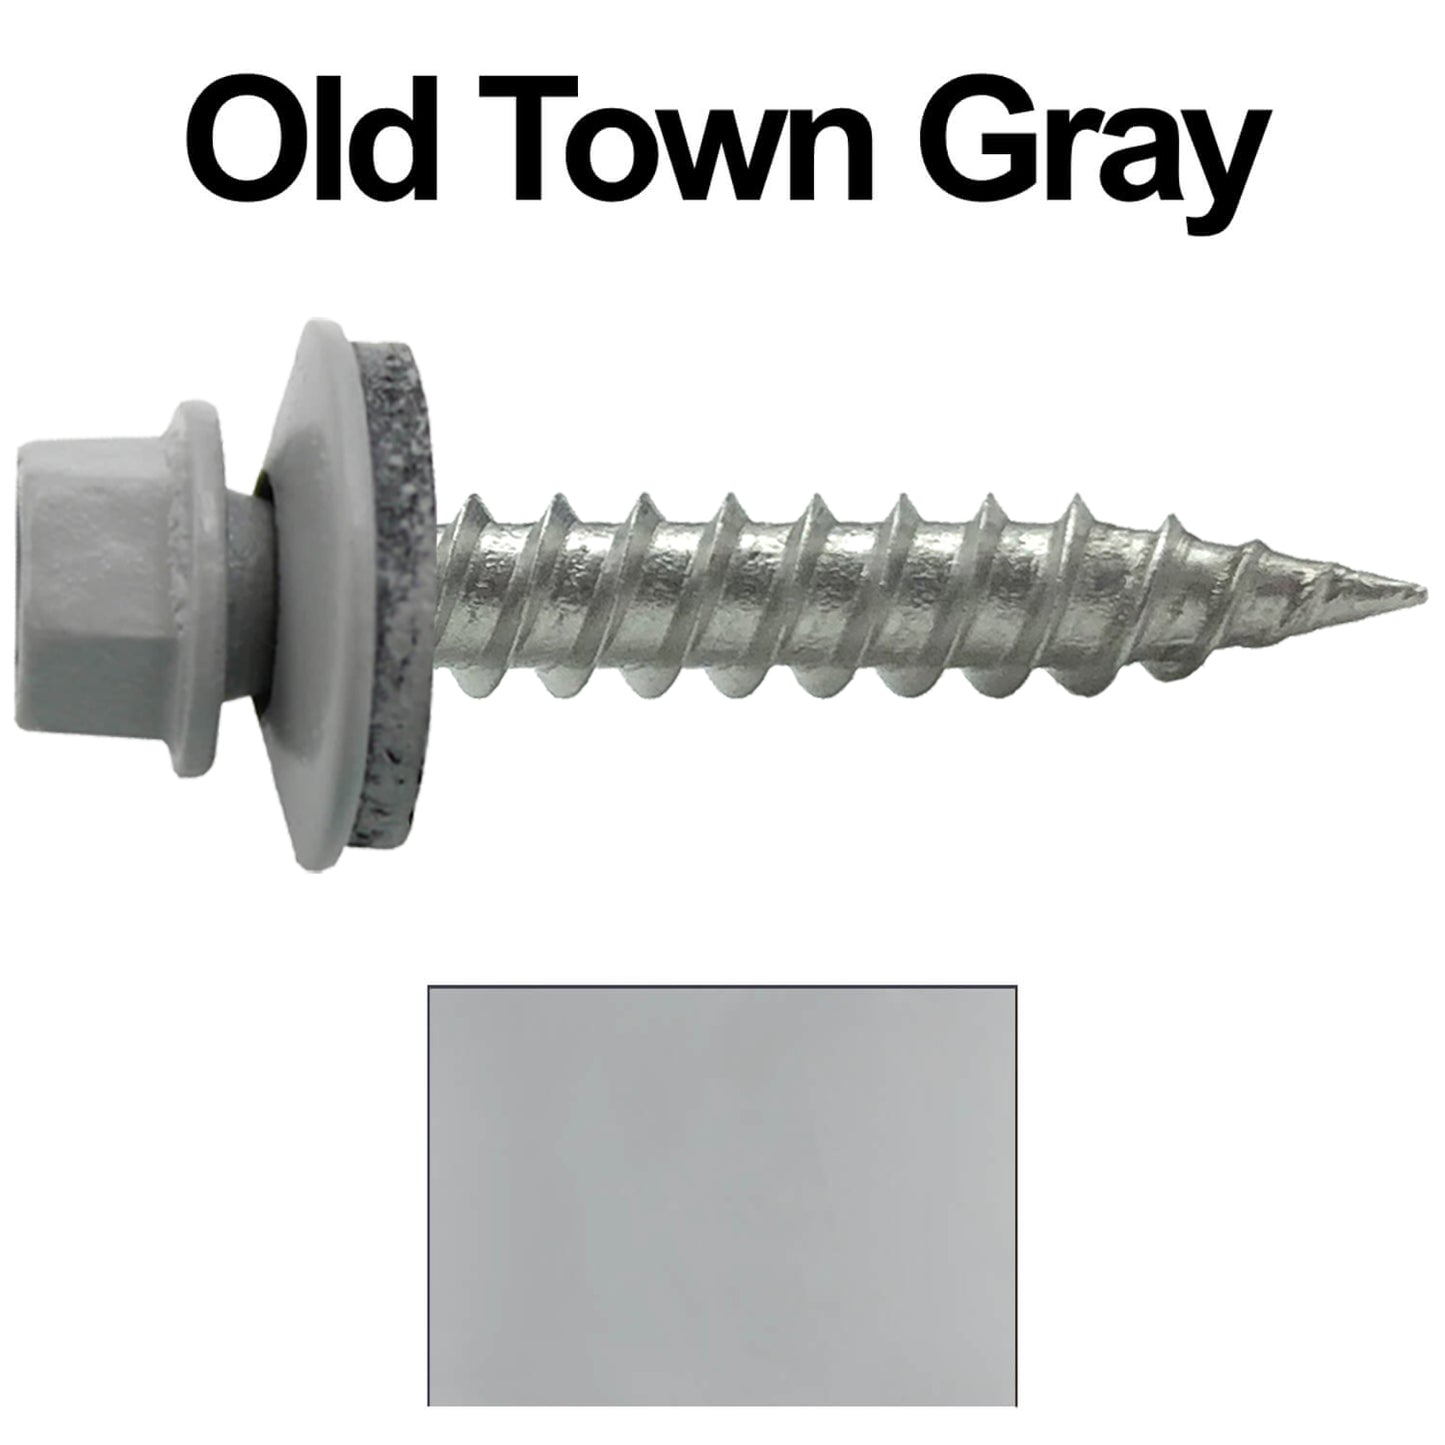 9 x 1" Stainless Steel Metal Roofing Screws. Hex head sheet metal roofing screw. Self-Piercing (SP) tip metal to wood siding screws EPDM washer (Qty 250)